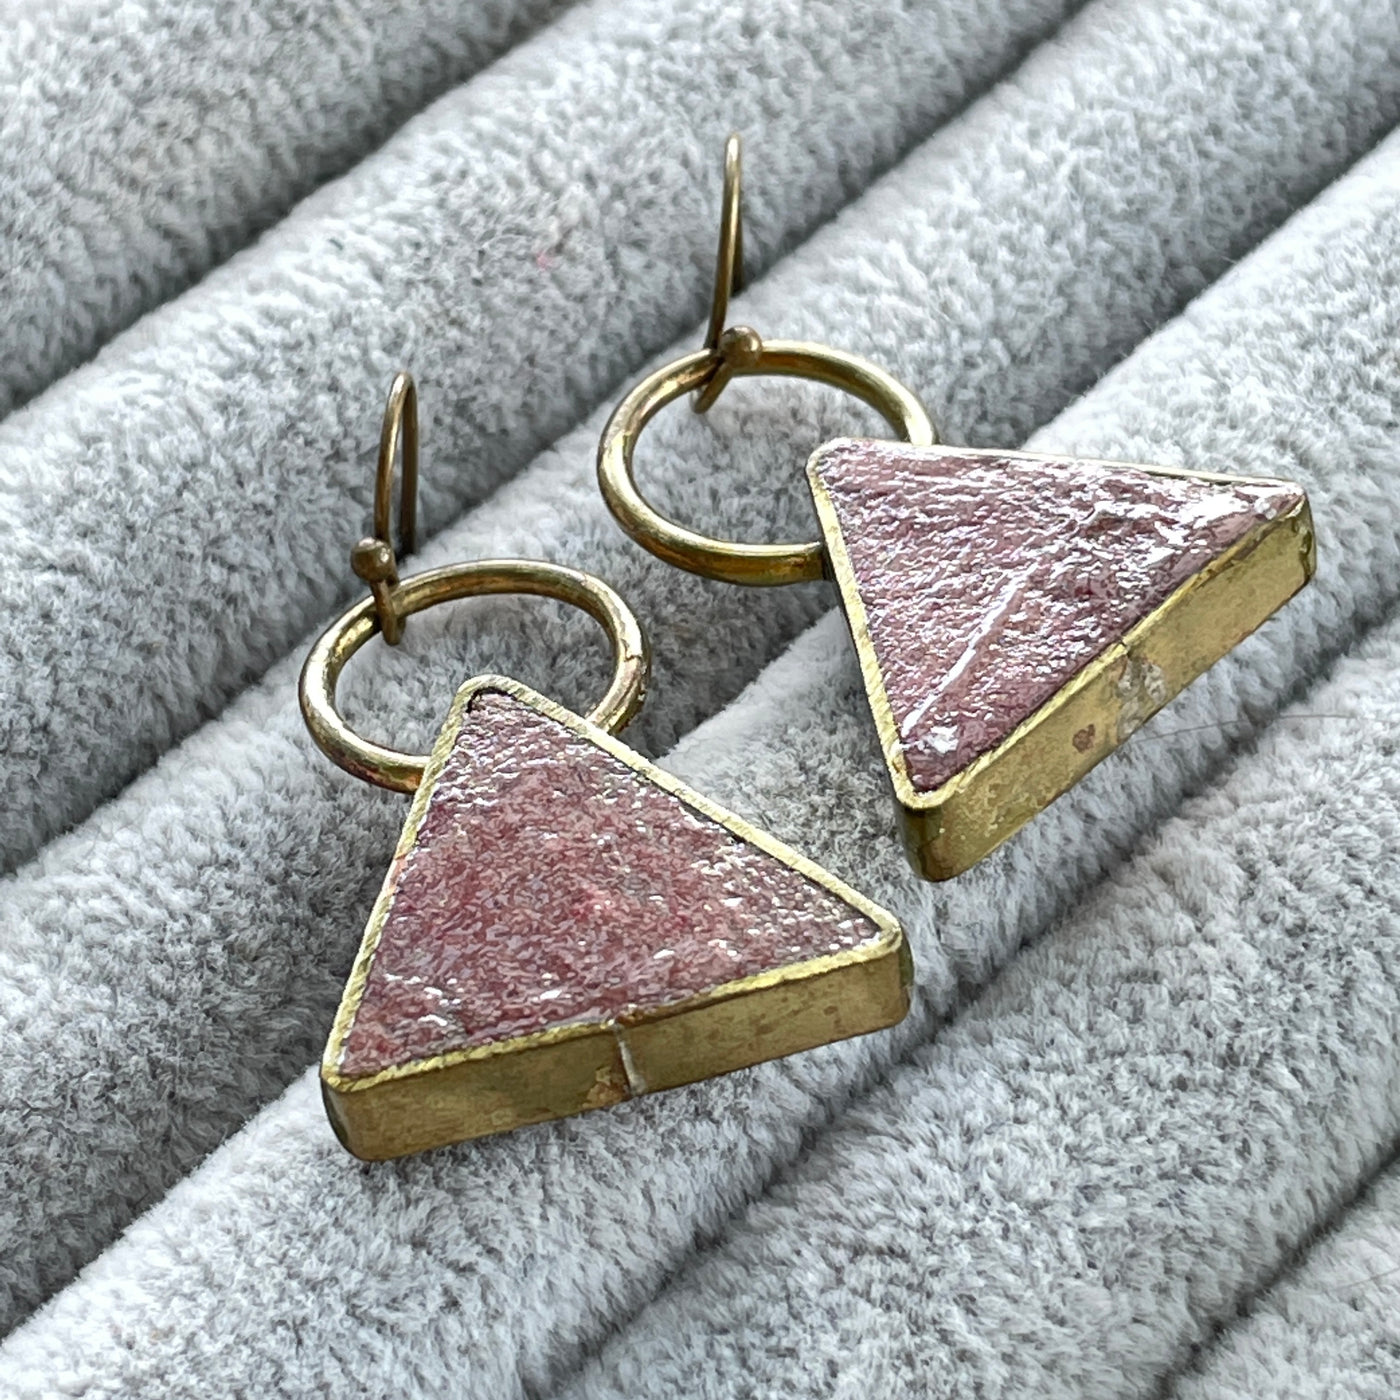 Upcycled Paper Pulp Fair-Trade Earrings (Sample Pieces)